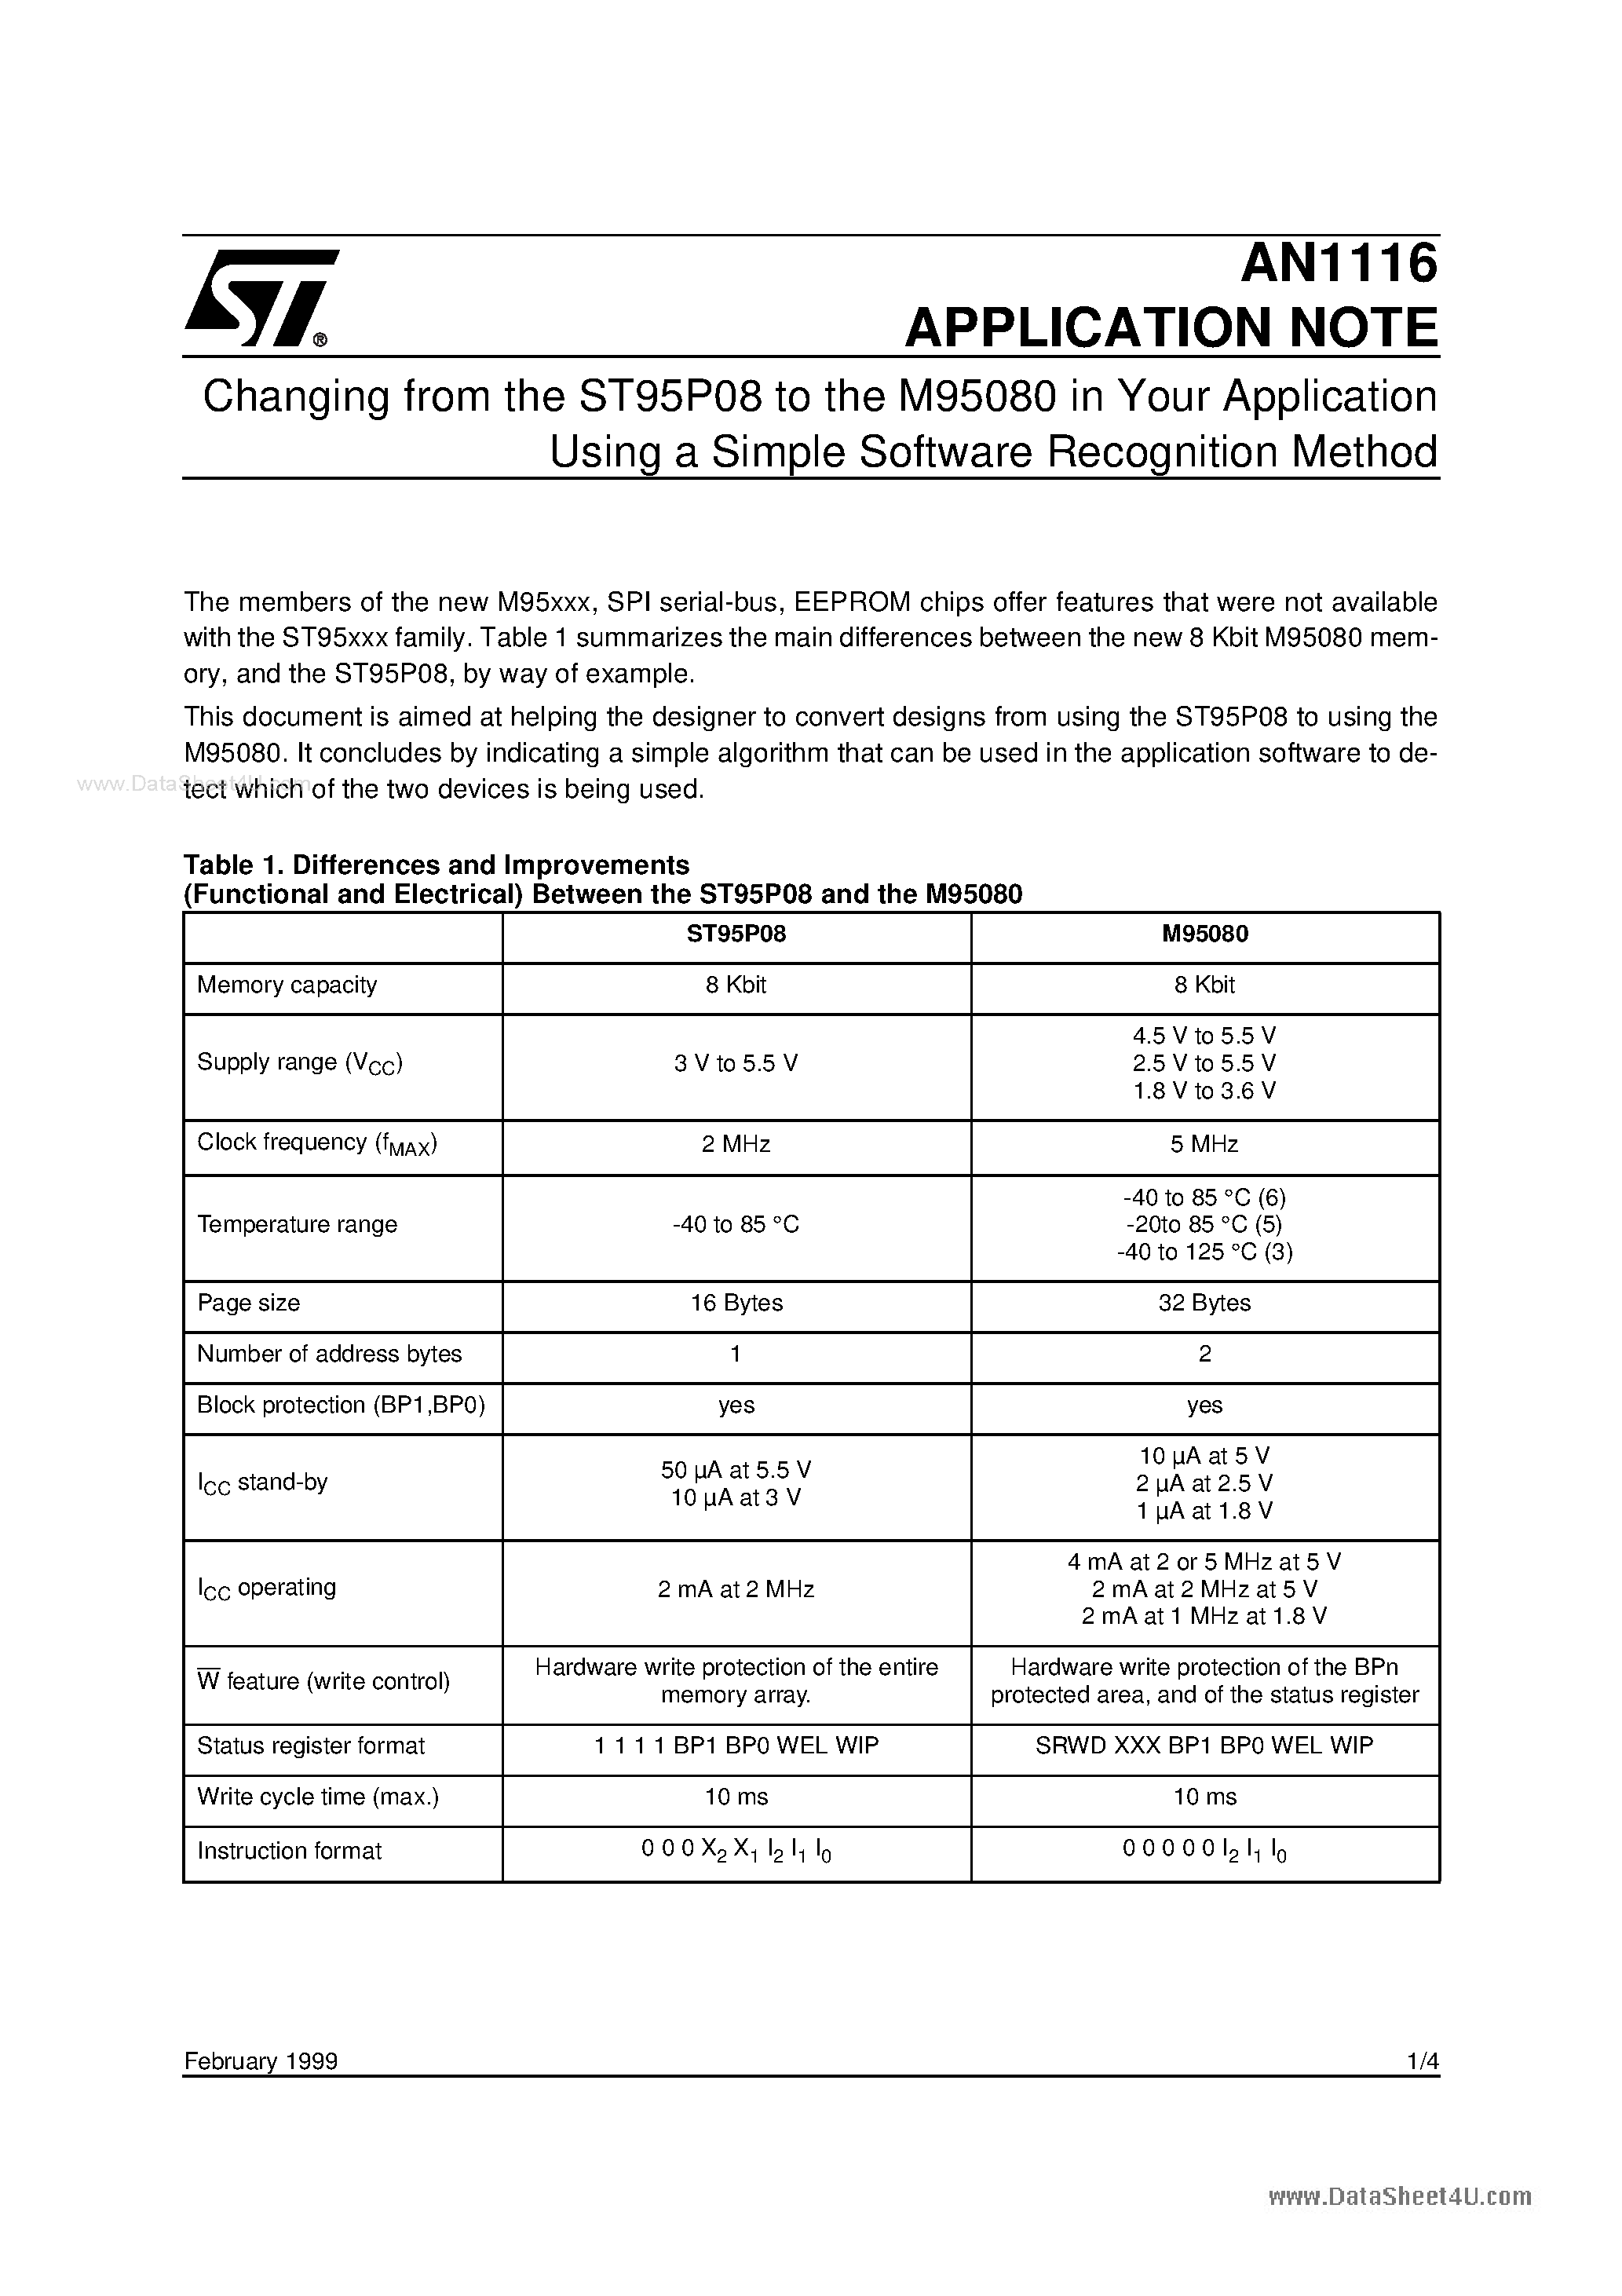 Datasheet AN1116 - CHANGING FROM THE ST95P08 TO THE M95080 IN YOUR APPLICATION USING A SIMPLE SOFTWARE RECOGNITION METHOD page 1